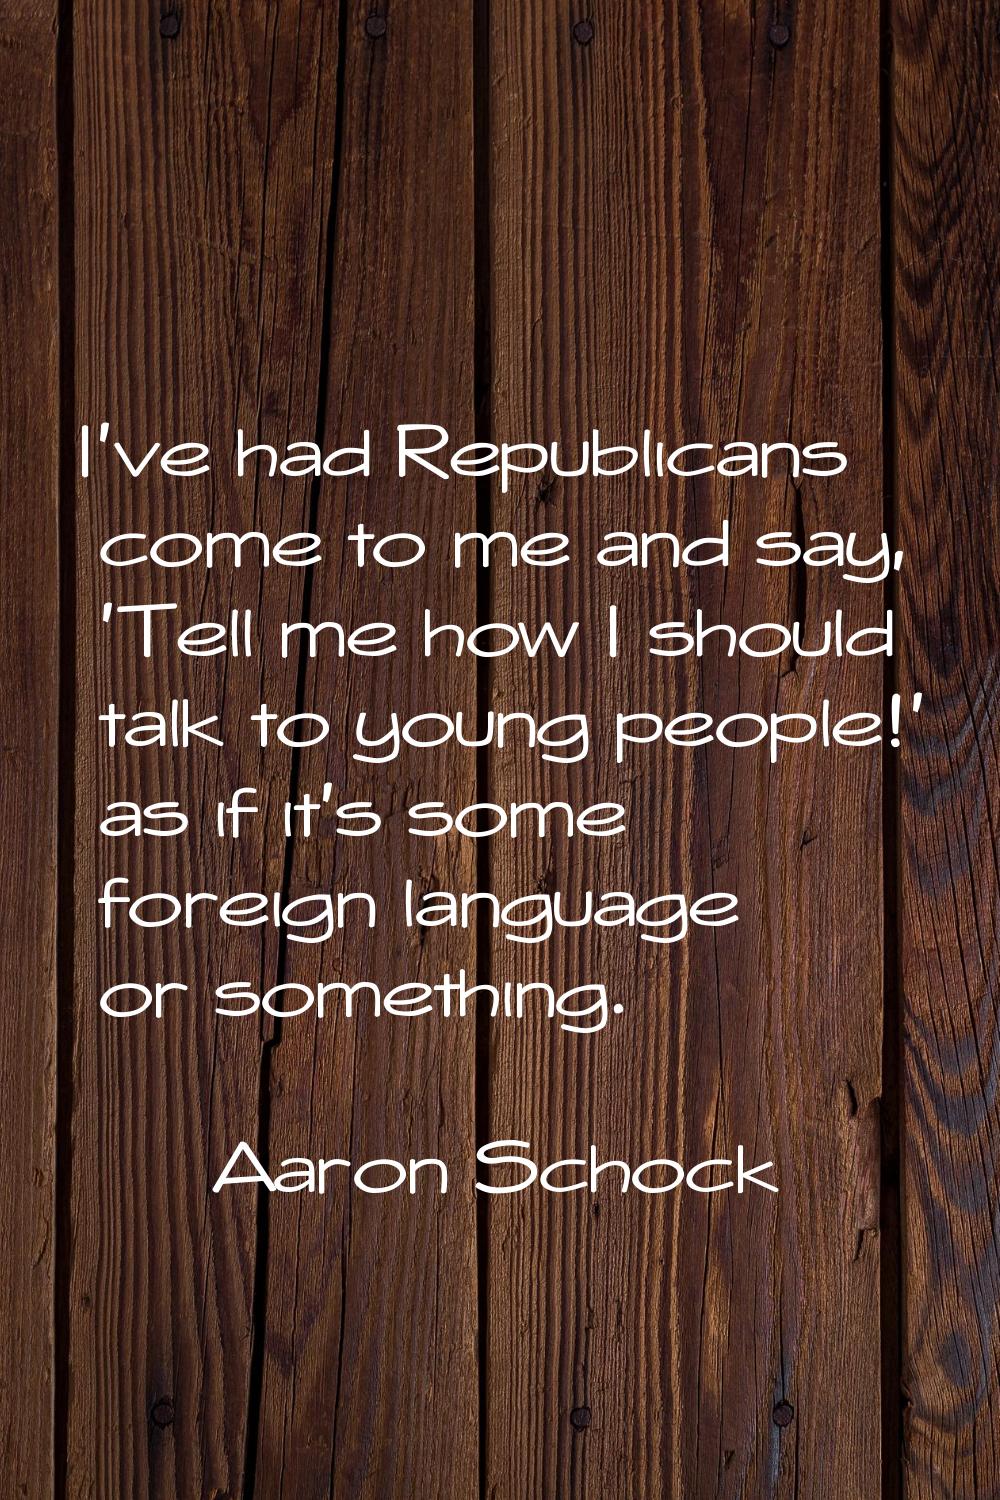 I've had Republicans come to me and say, 'Tell me how I should talk to young people!' as if it's so